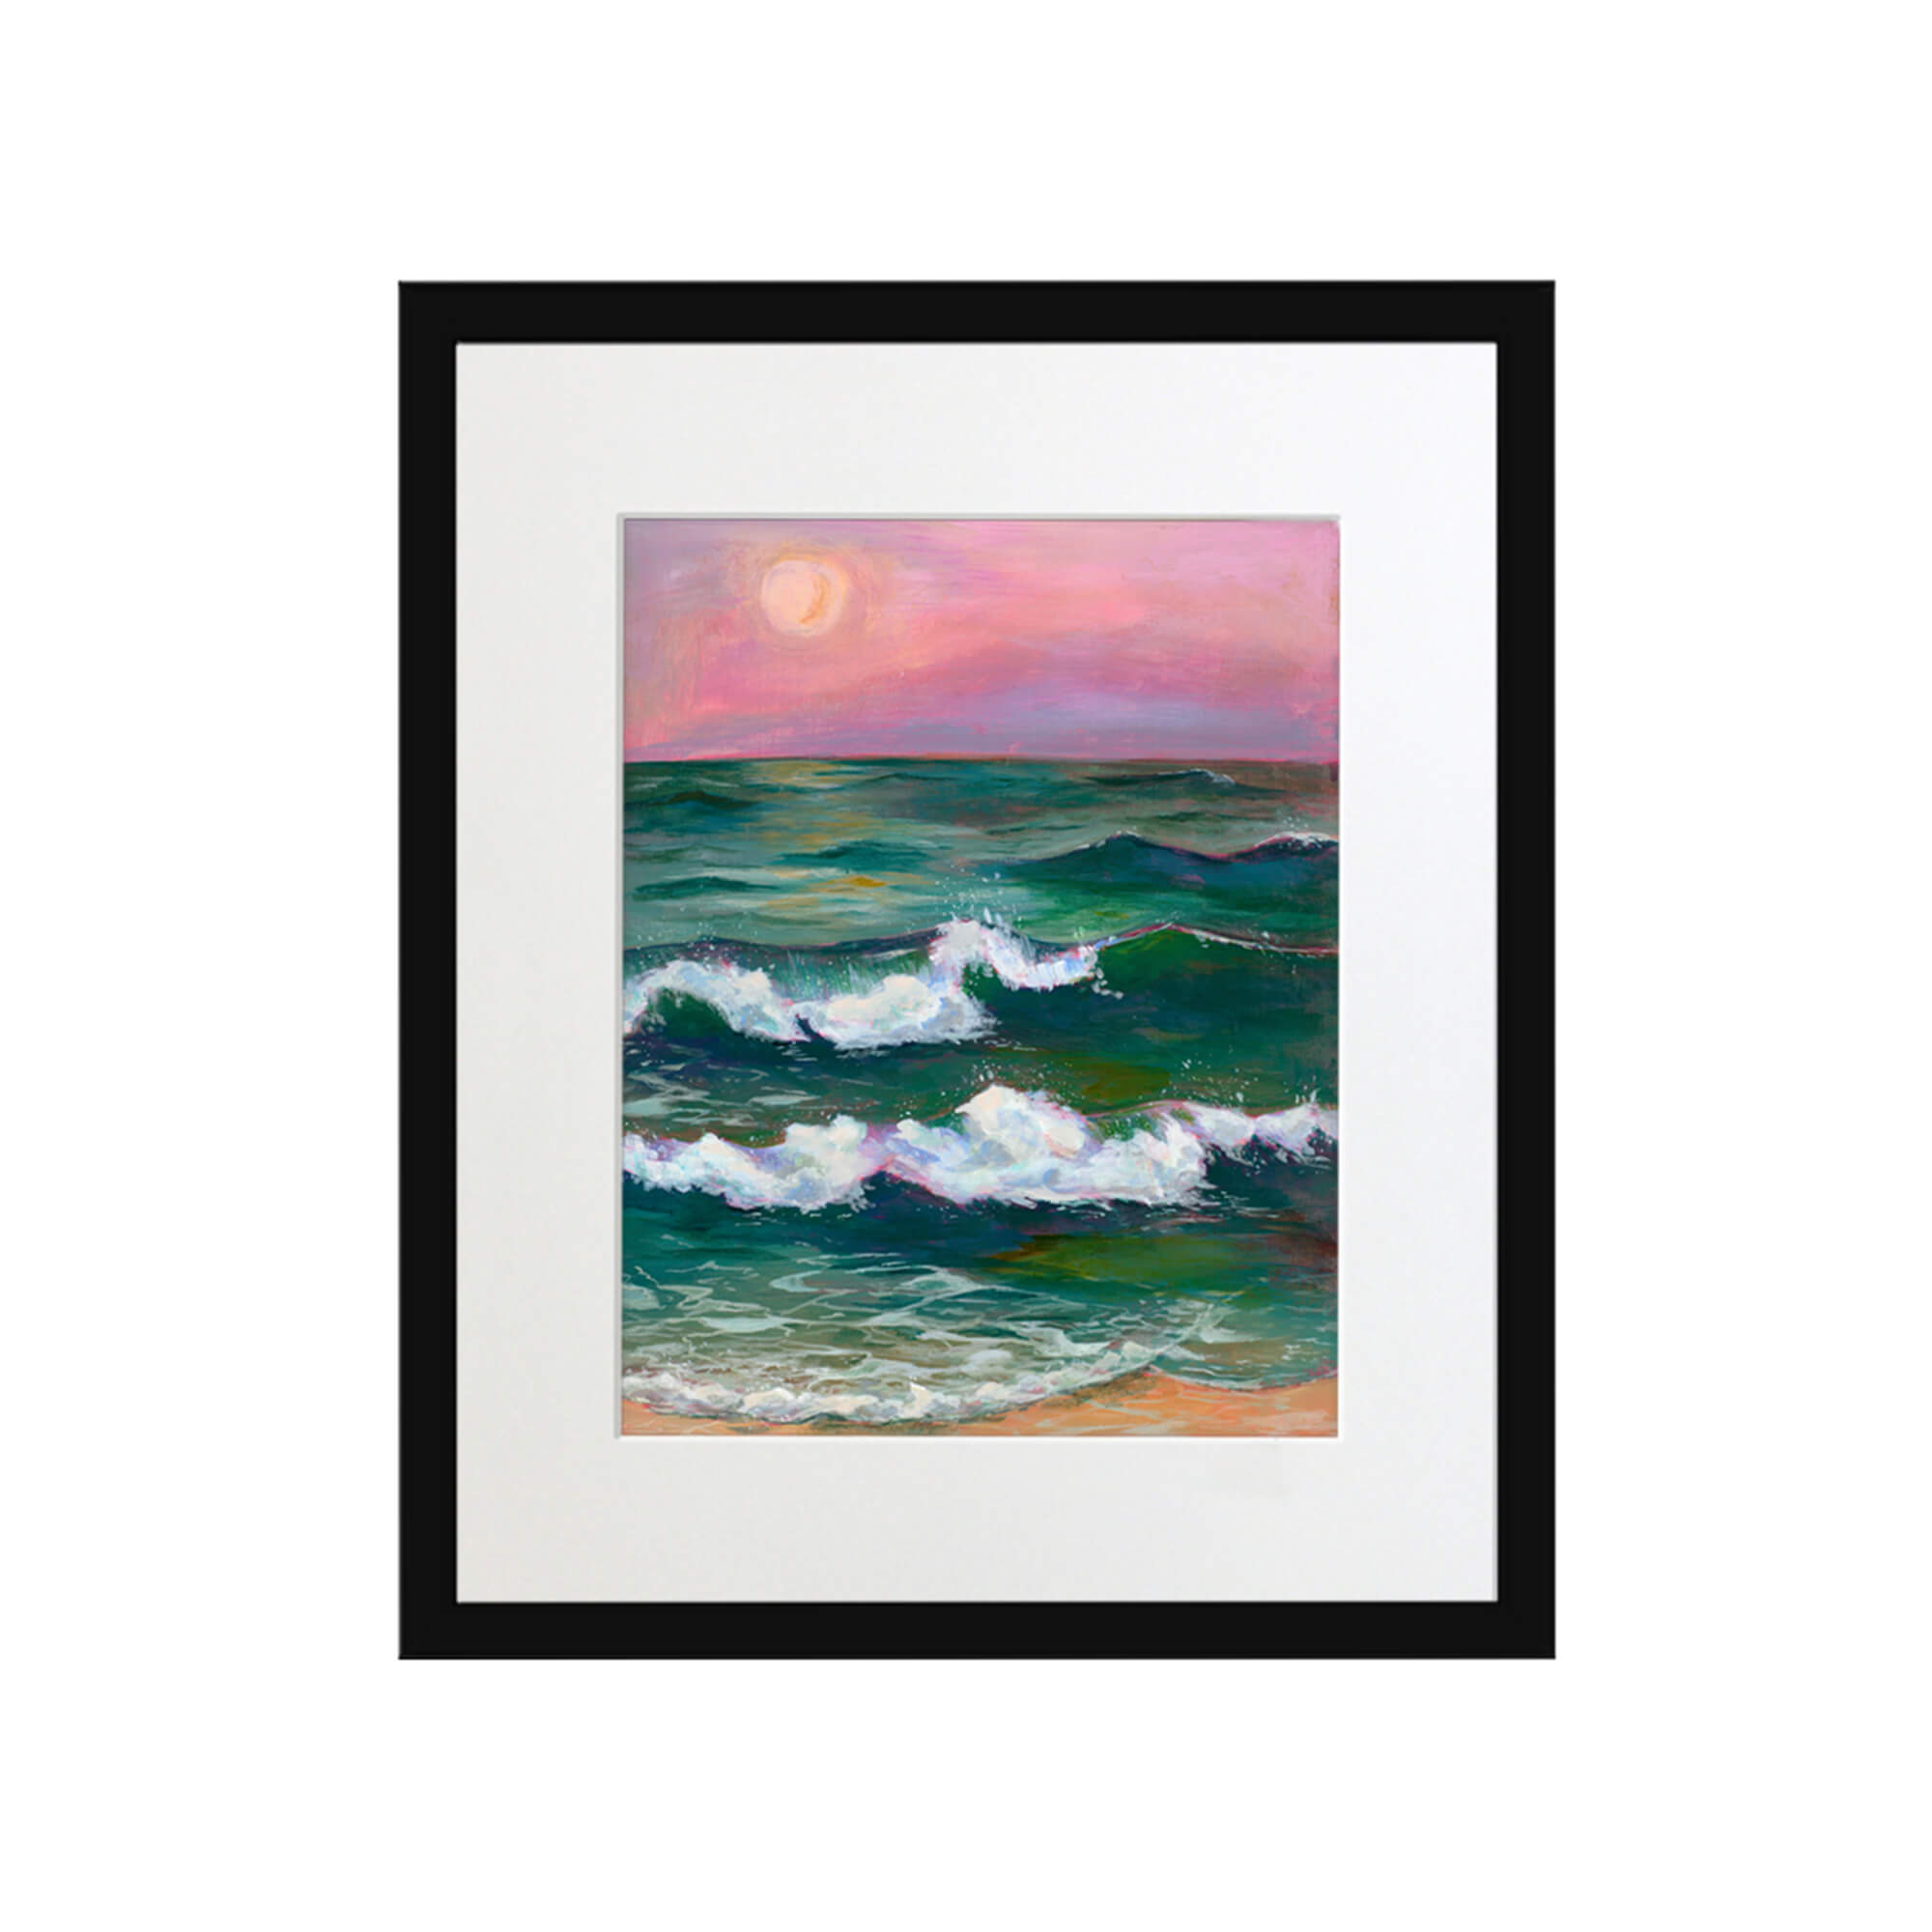 A sunset with pink sky by Hawaii artist Lindsay Wilkins